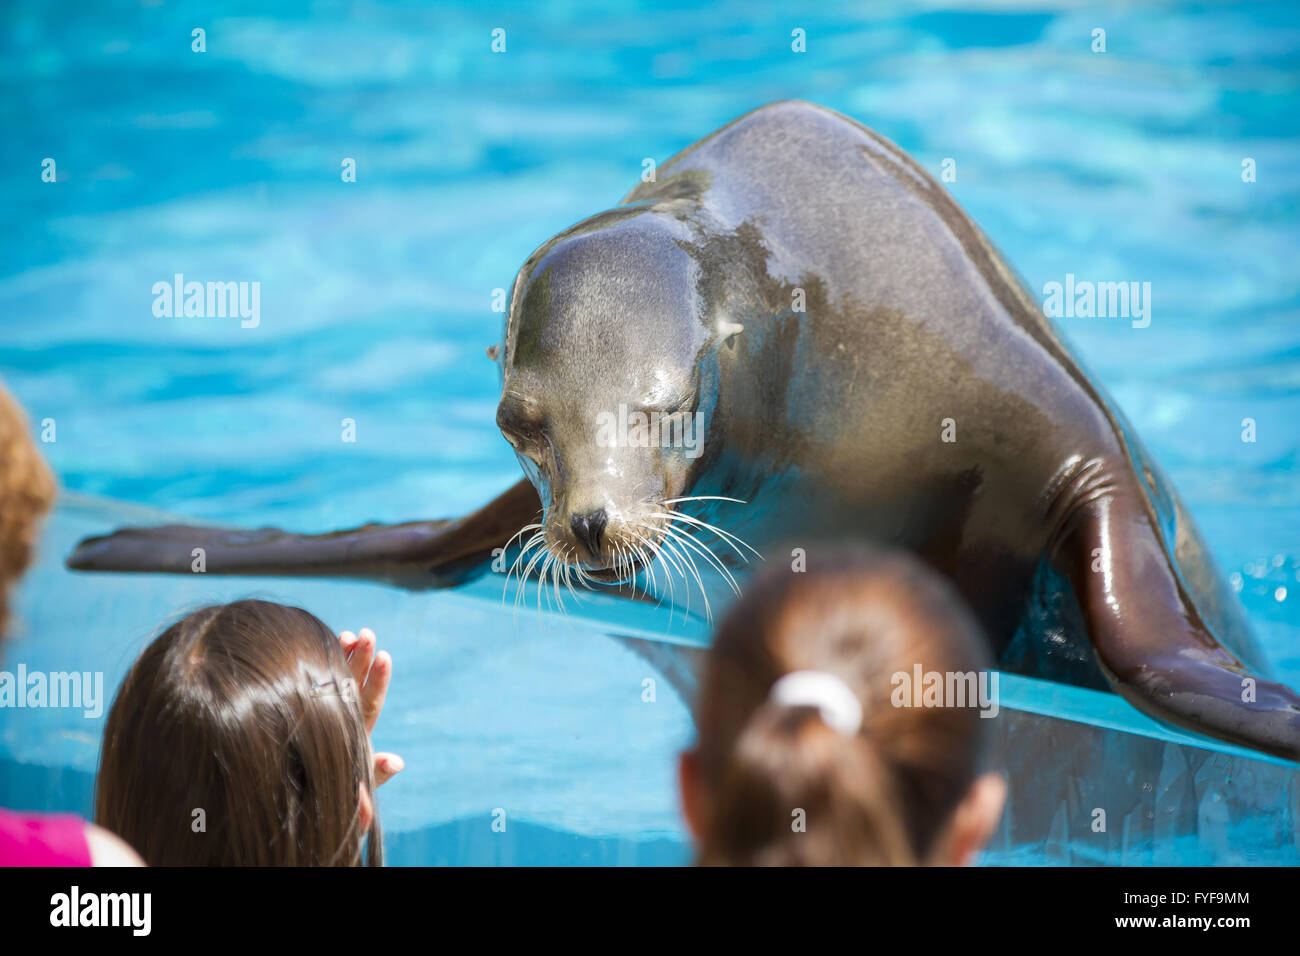 Sea dog playing with childs, seal Stock Photo